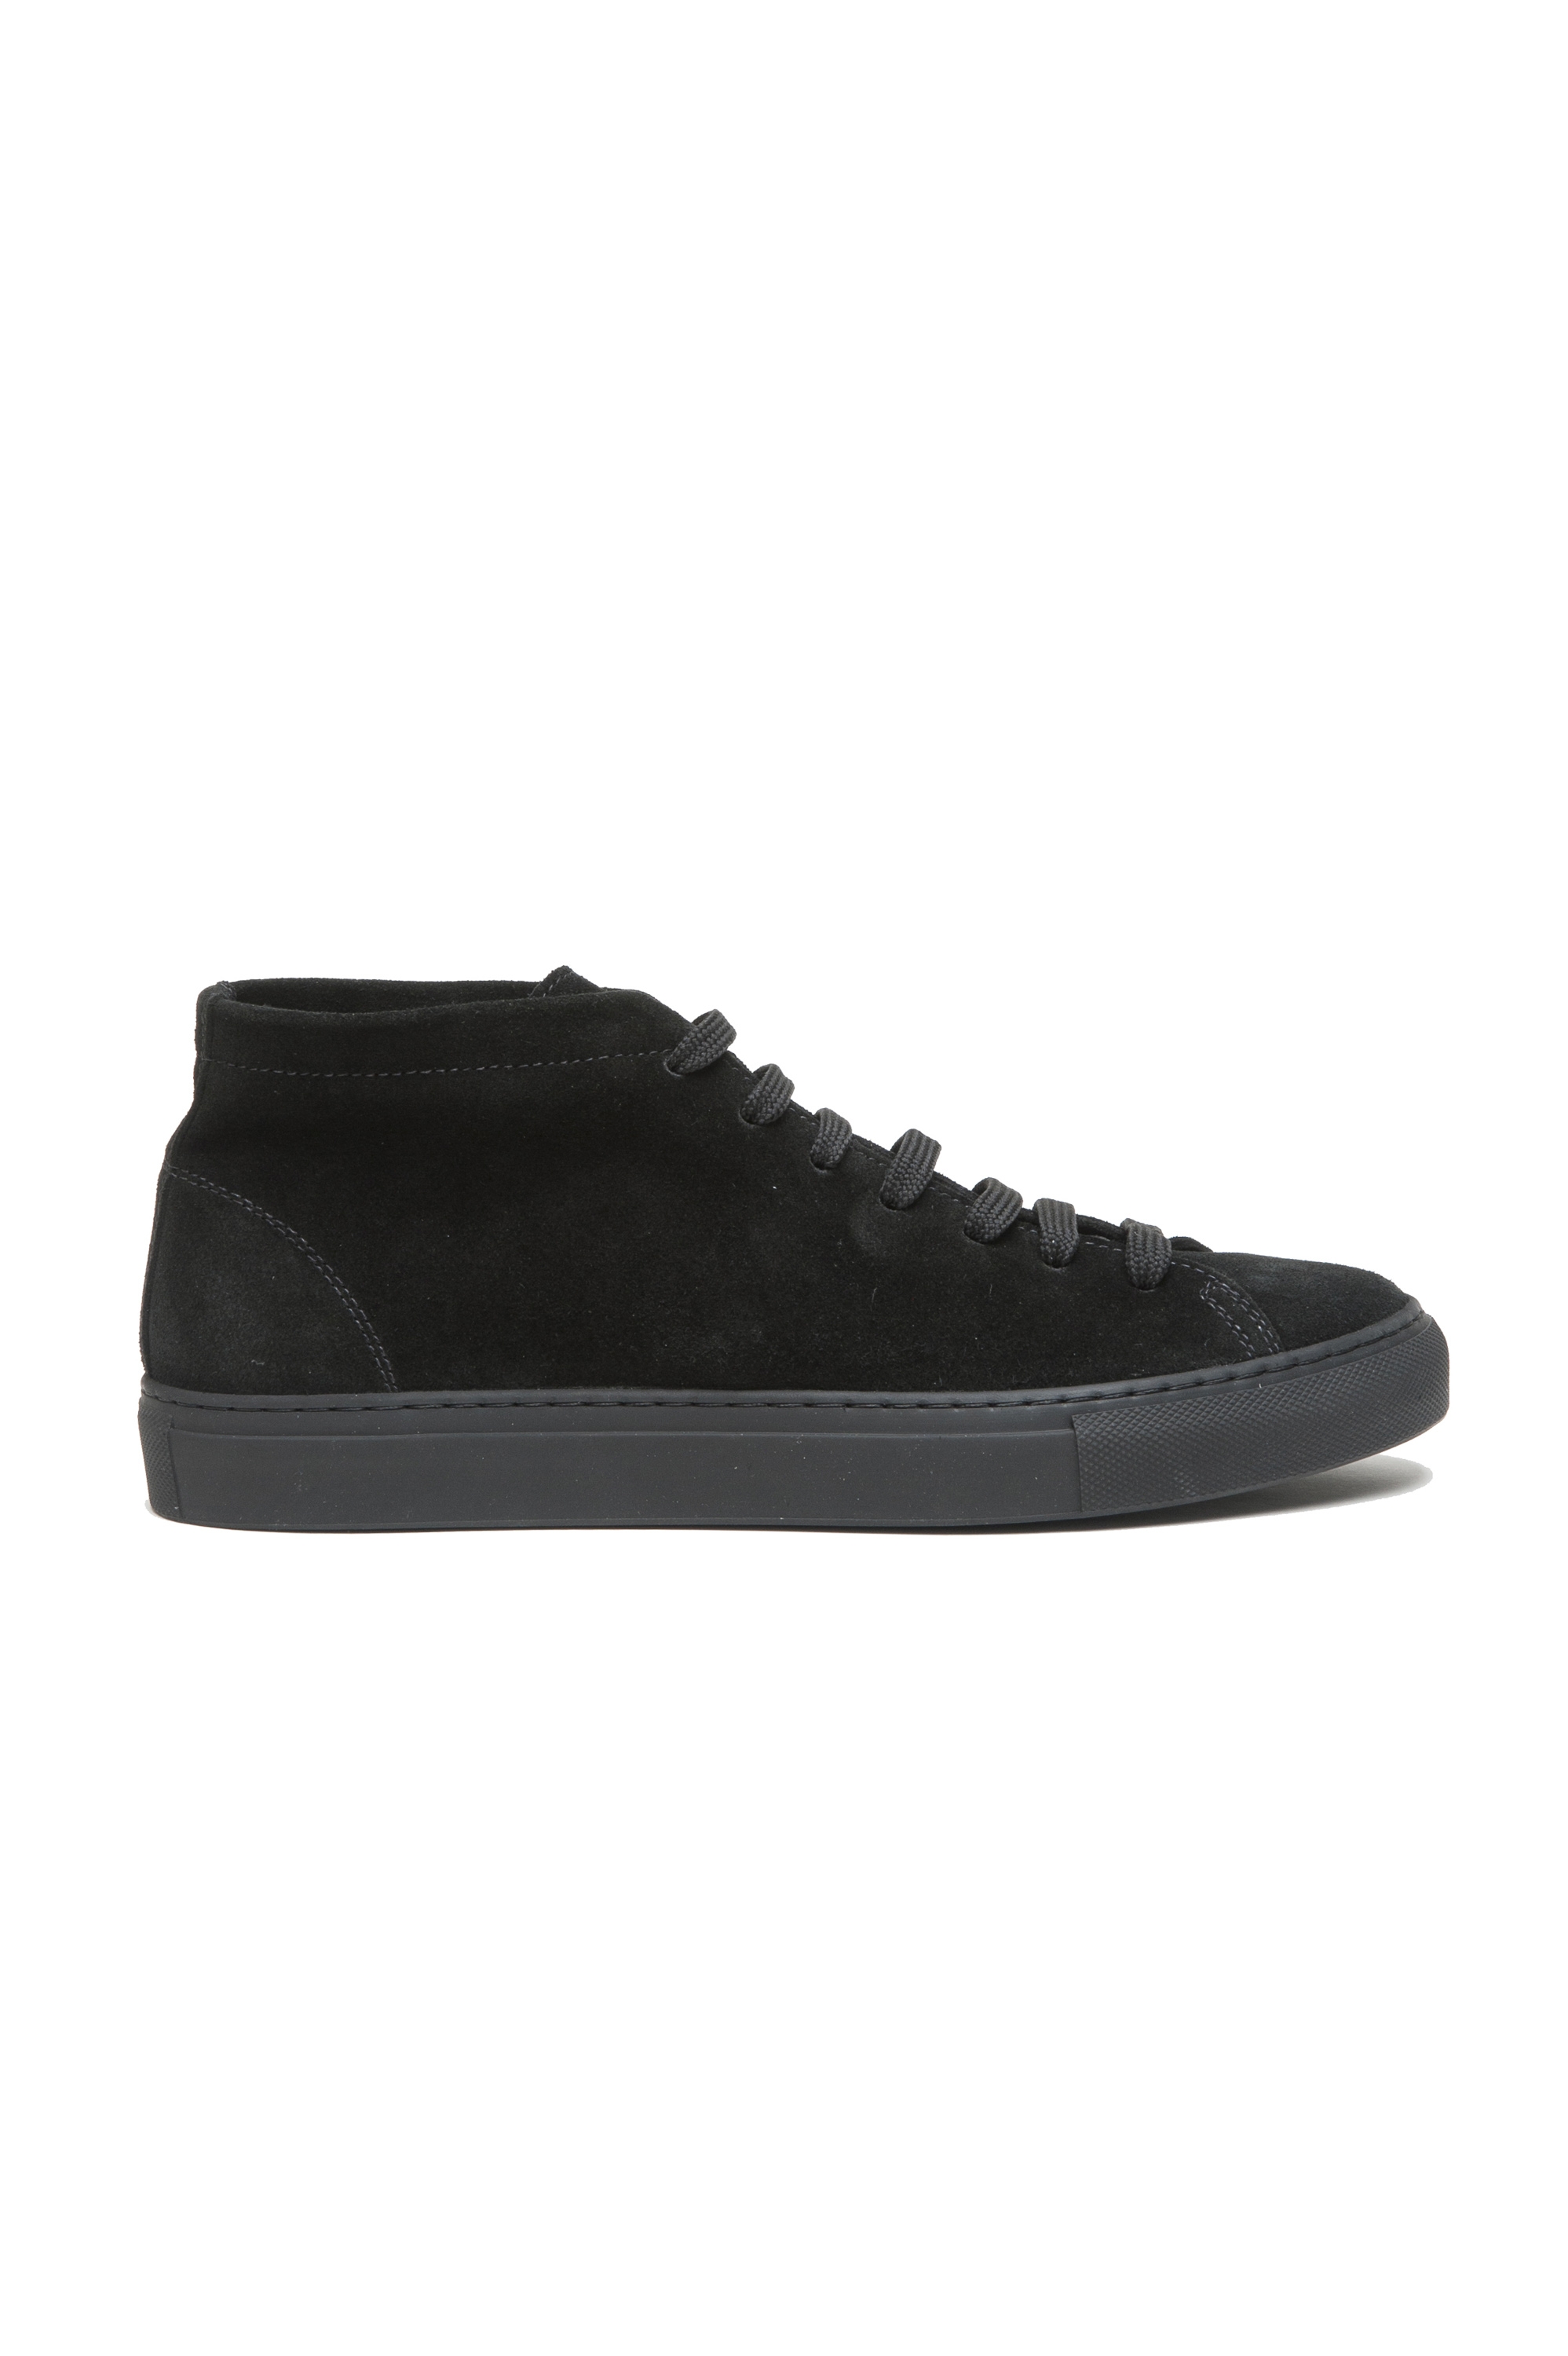 SBU 02865_2020SS Black mid top lace up sneakers in suede leather 01